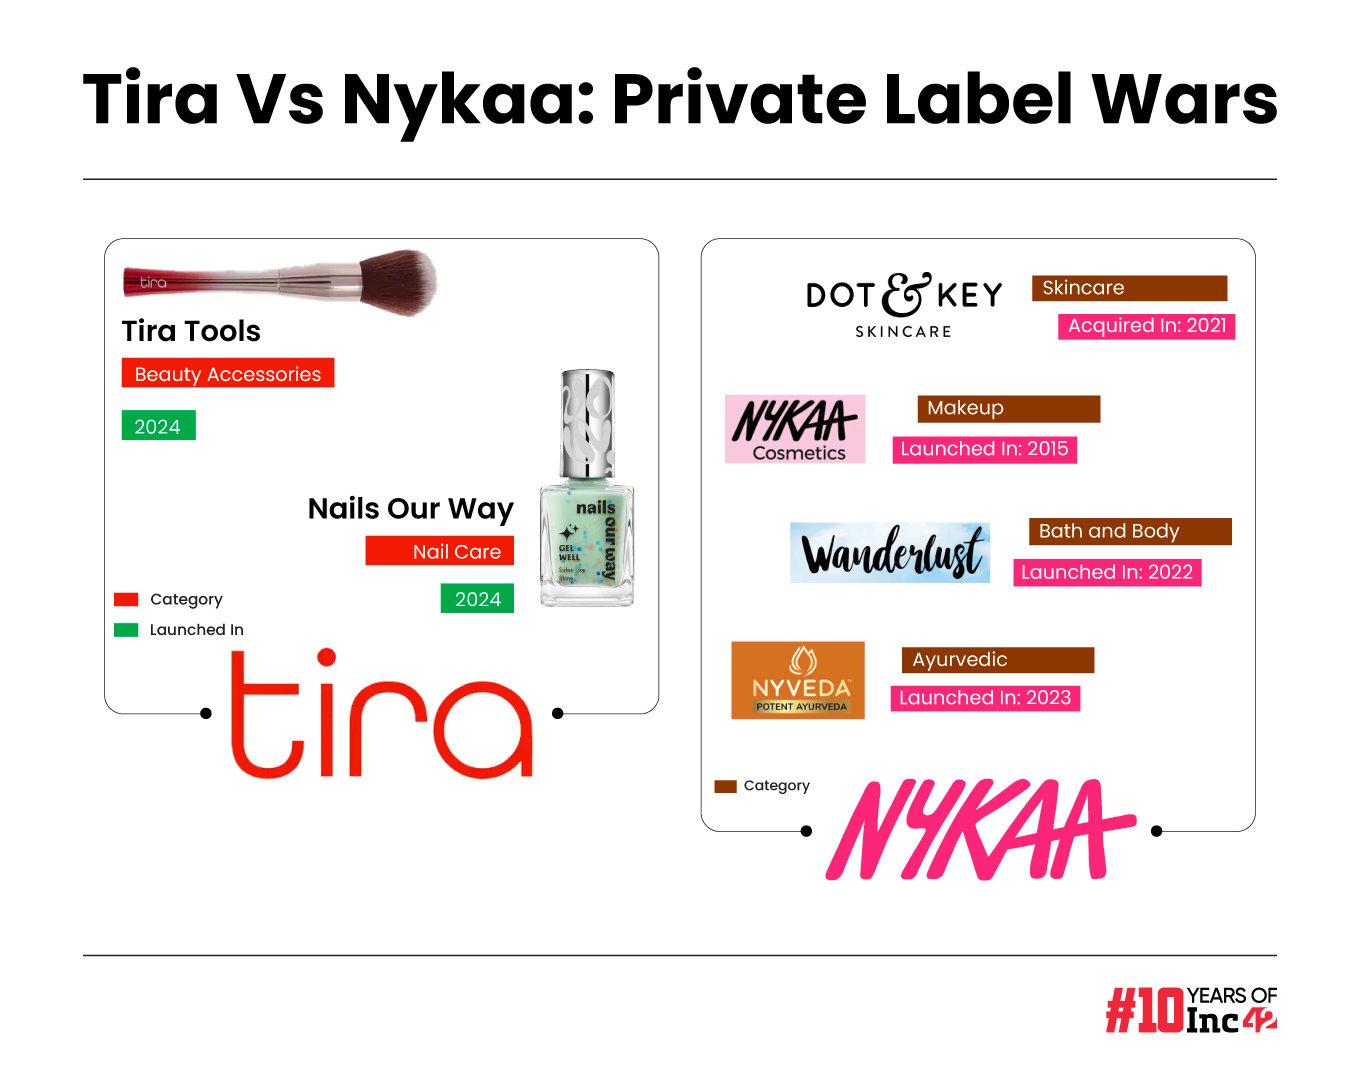 Will Tira’s Private Label Play Help Reliance Retail Outpace Nykaa?